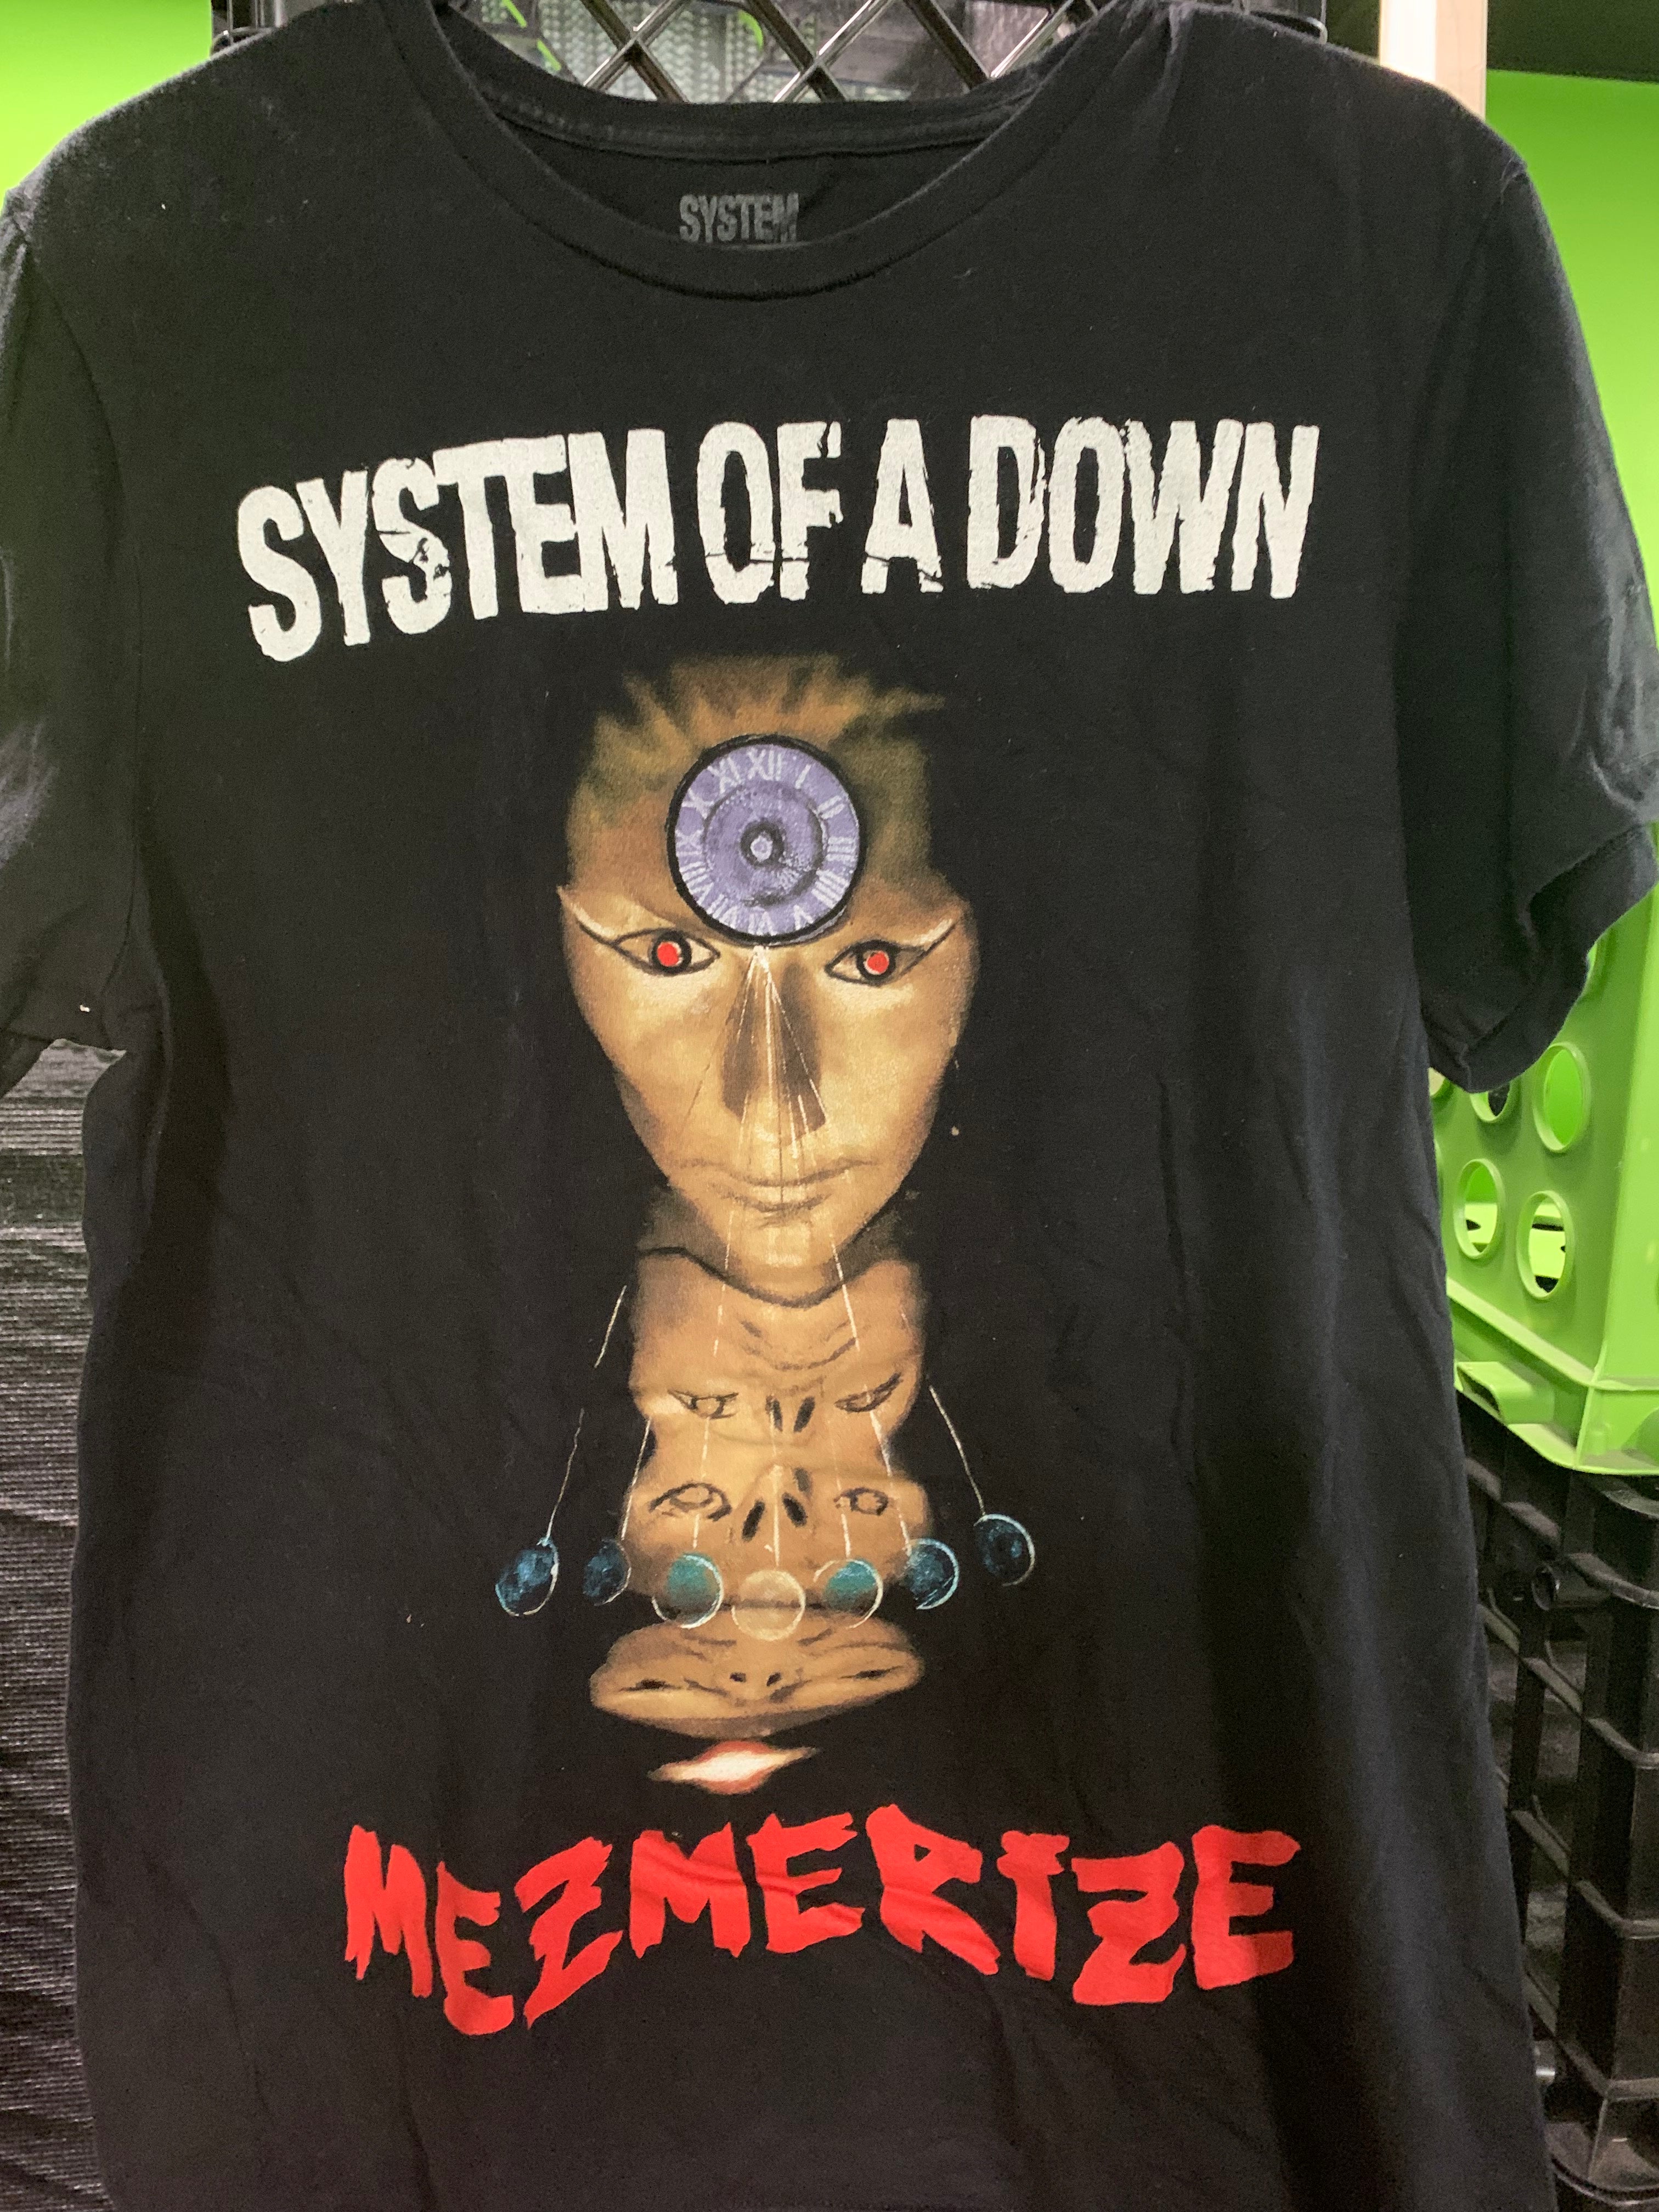 System Of A Down Mesmerize T-Shirt, Black, L